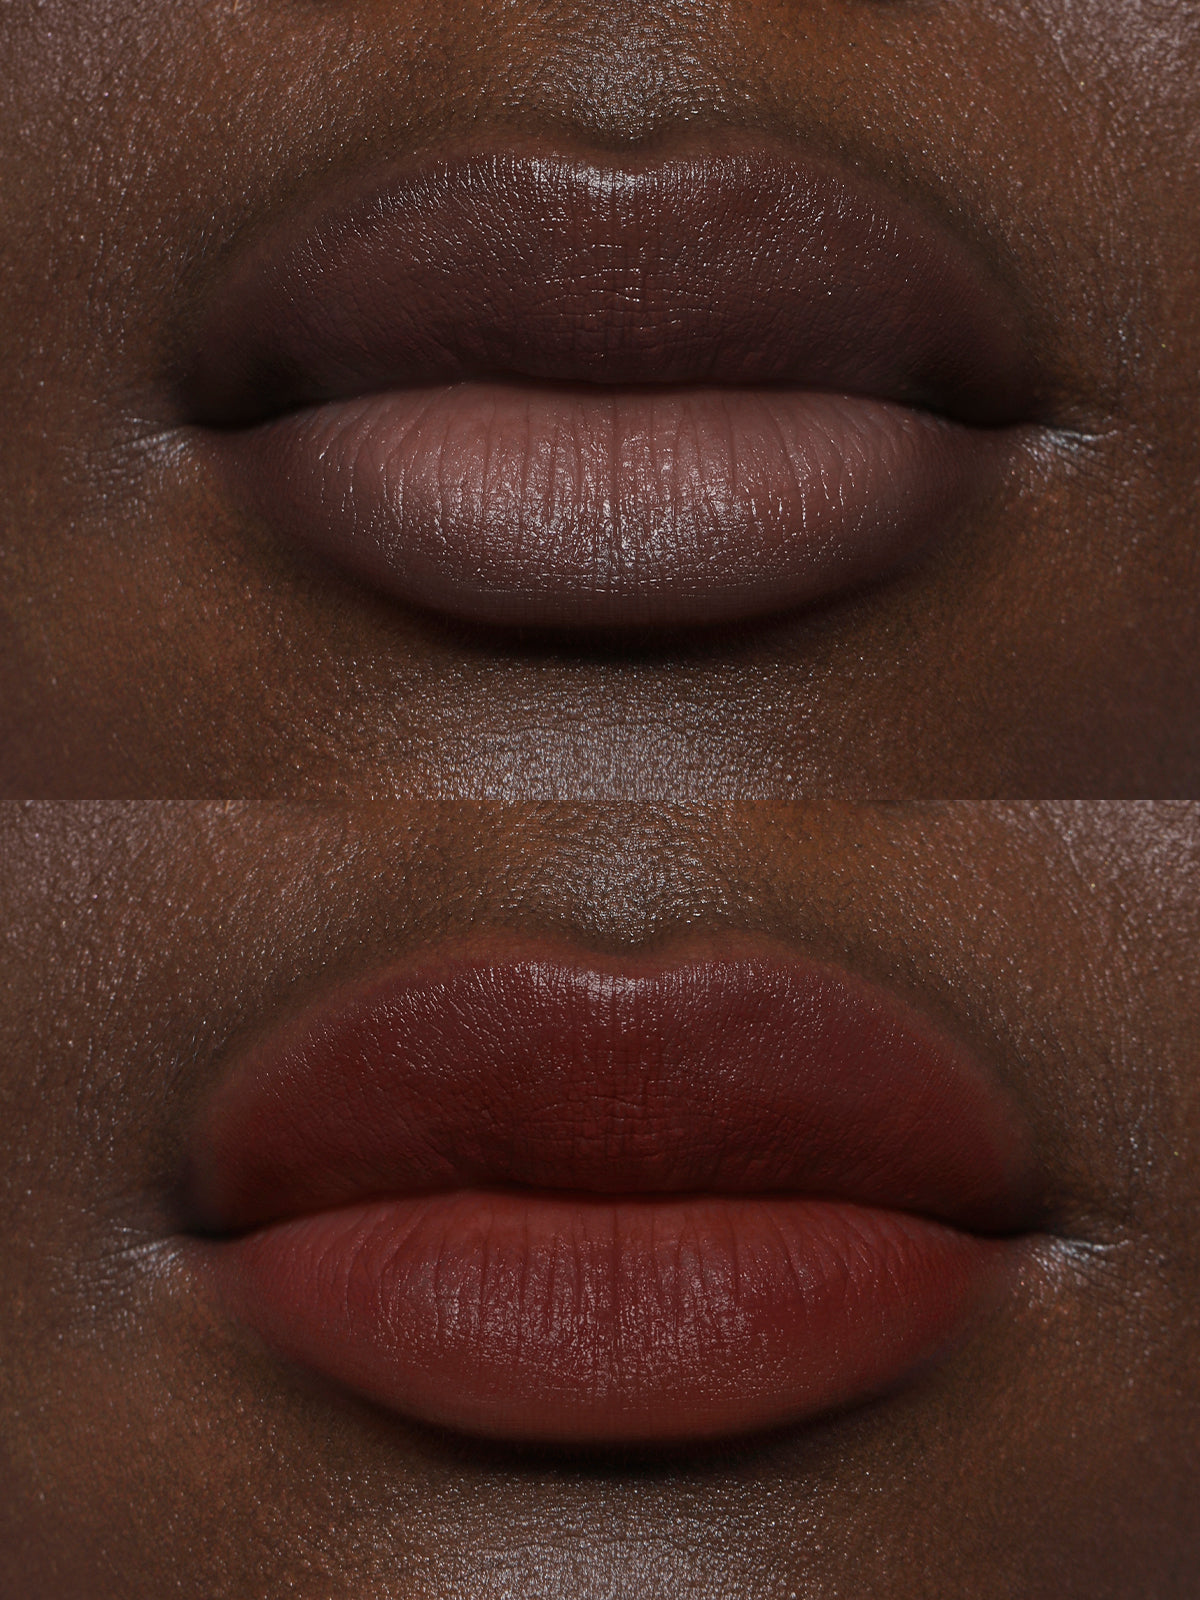 REFY LIP BLUSH IN SHADE CANYON BEFORE & AFTER